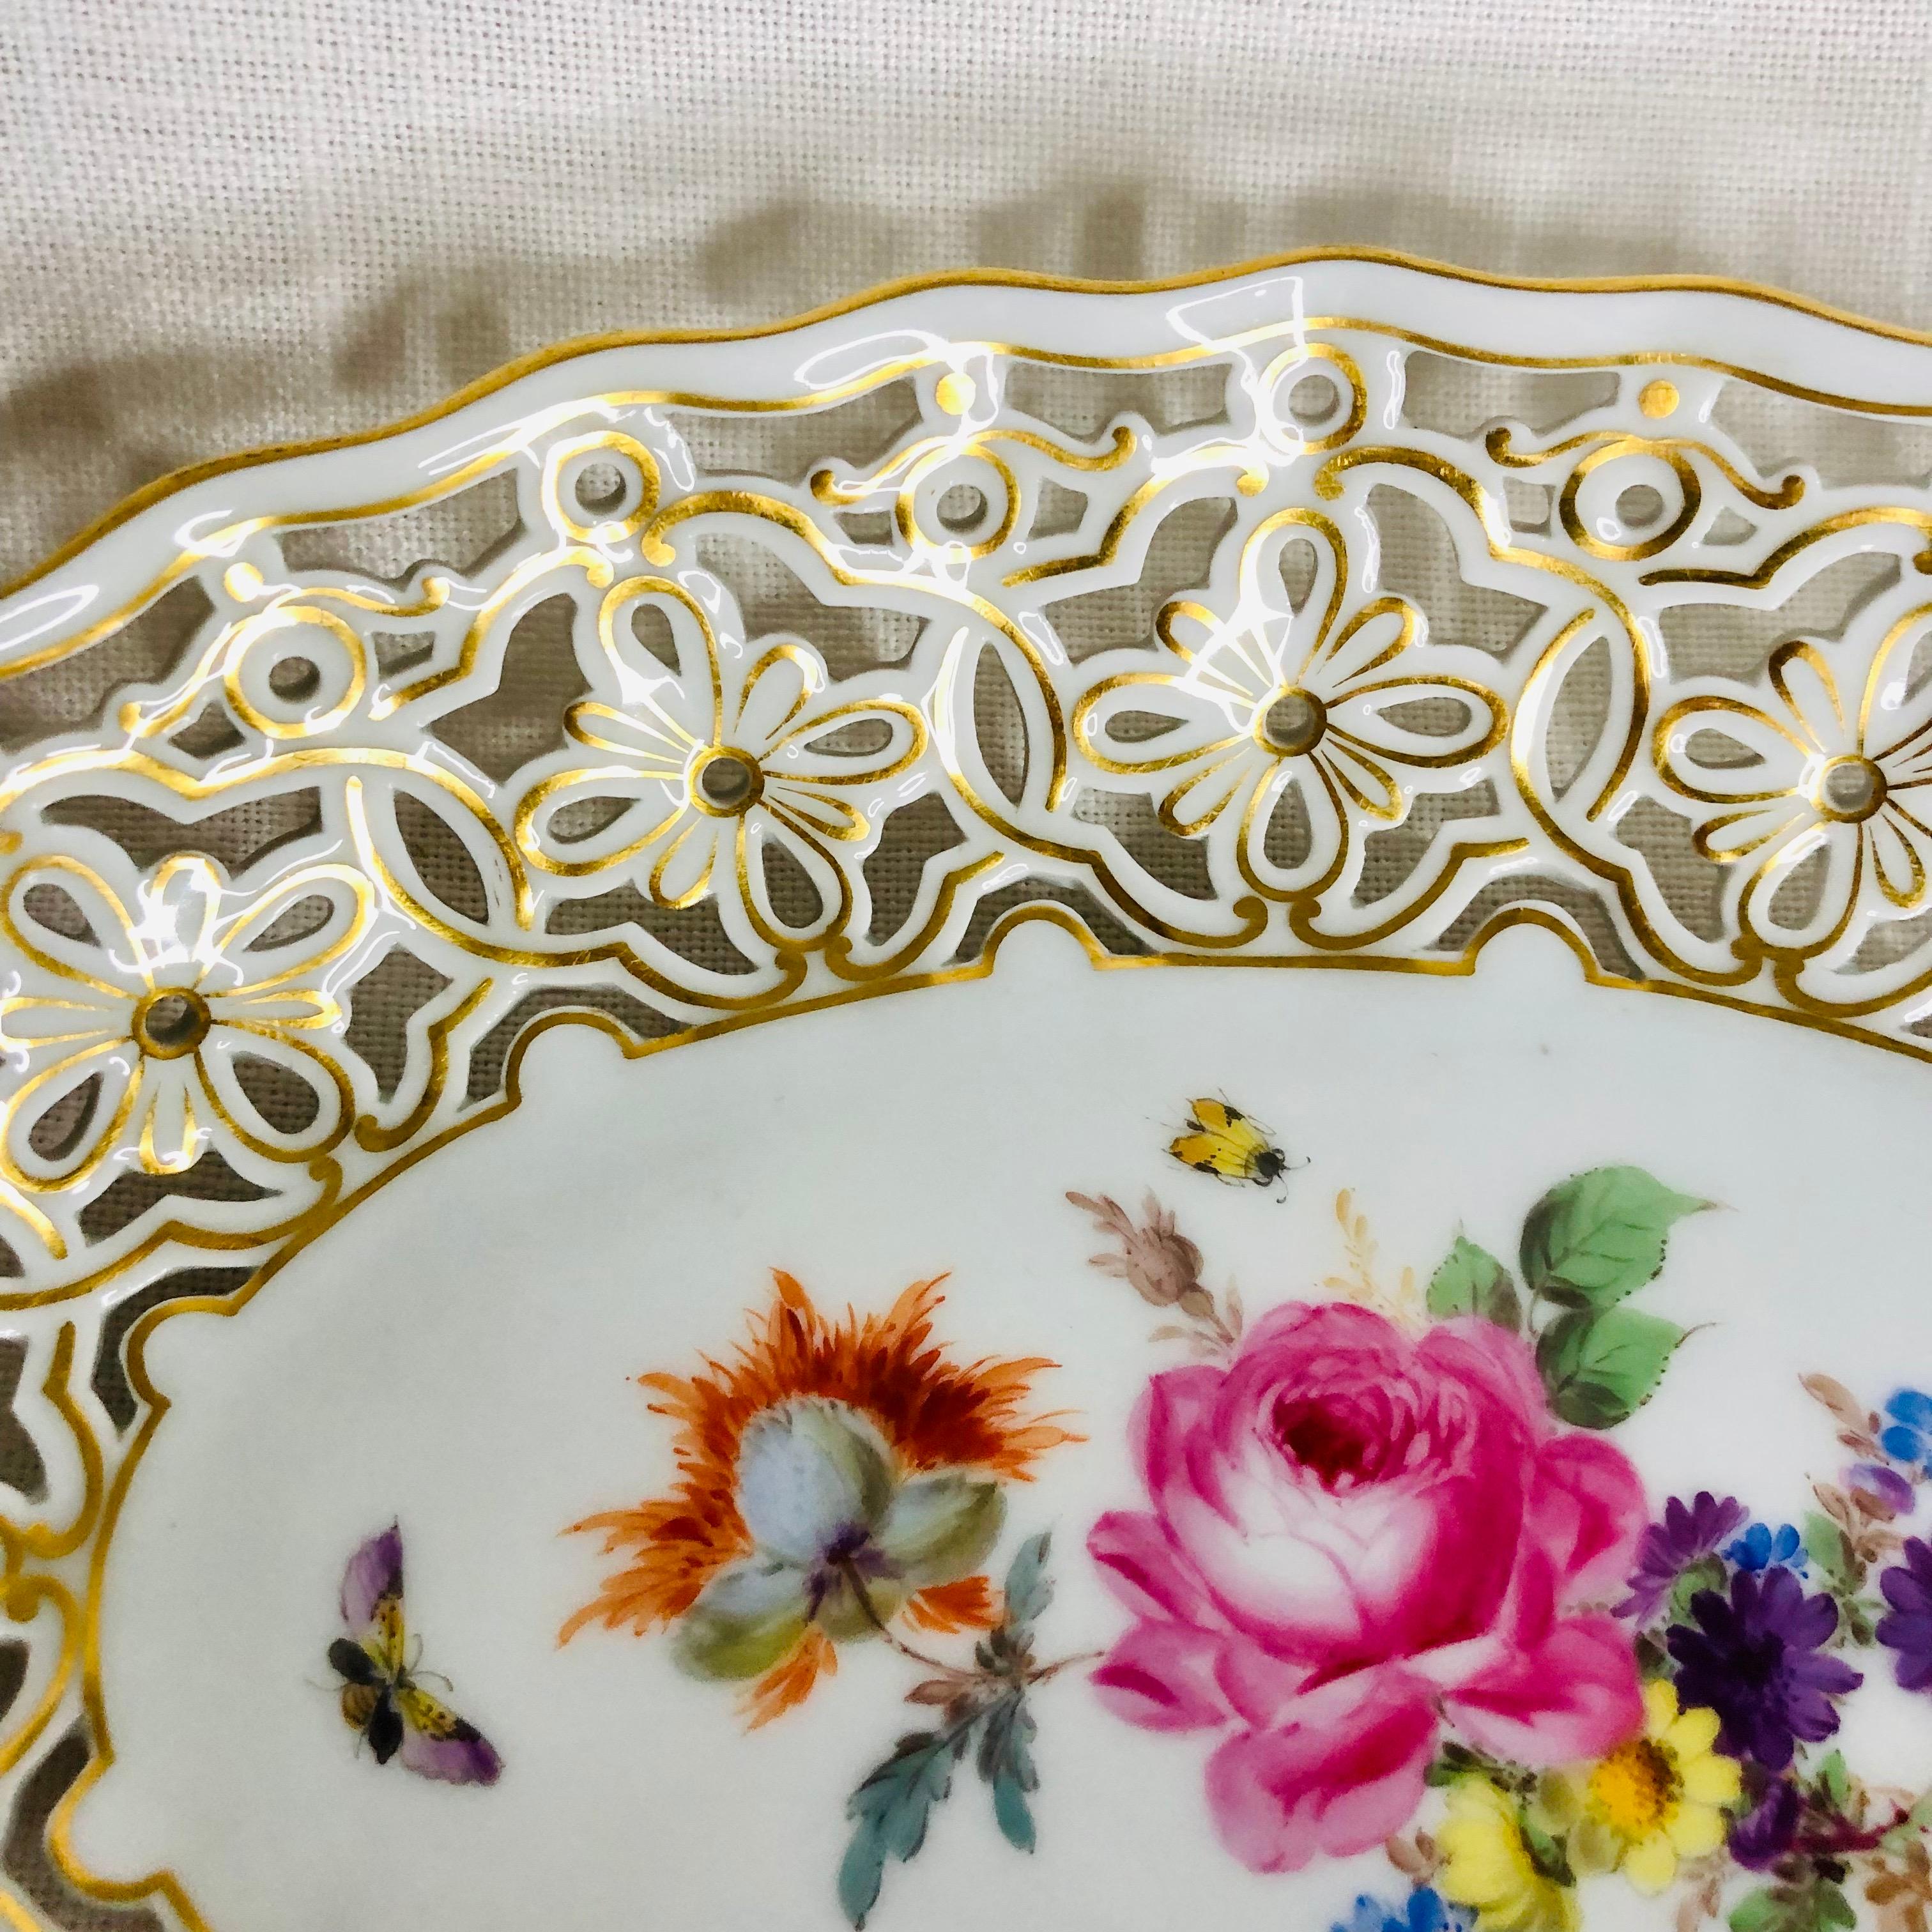 Late 19th Century Meissen Reticulated Bowl With Flower Bouquet & Accents of Butterflies & Insects For Sale